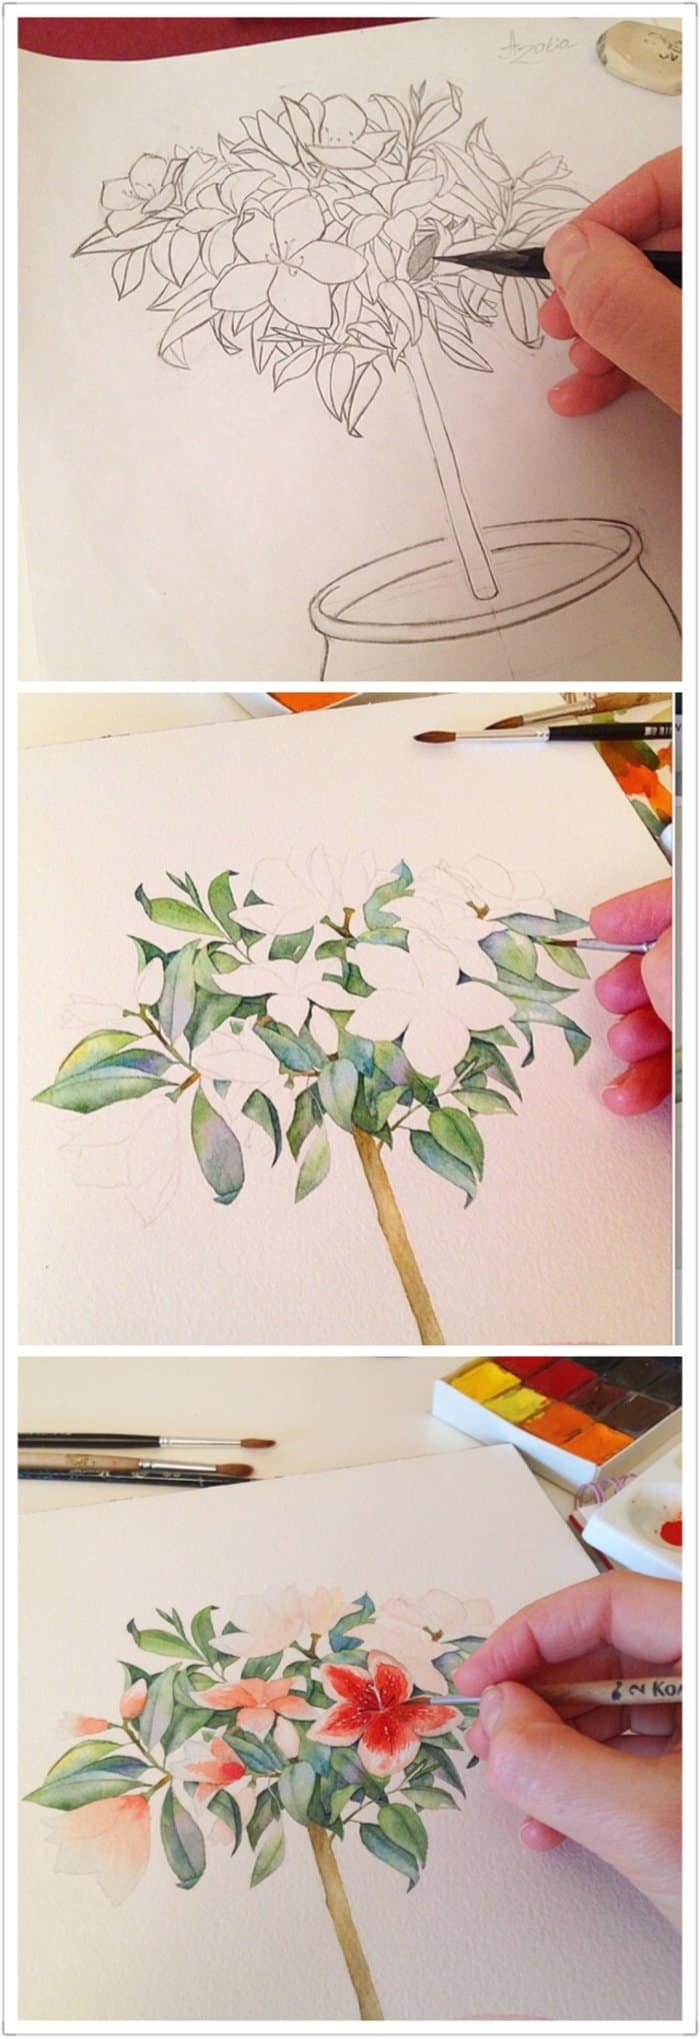 2. DRAW A FLOWER IN A POT AND ADD GORGEOUS TONES